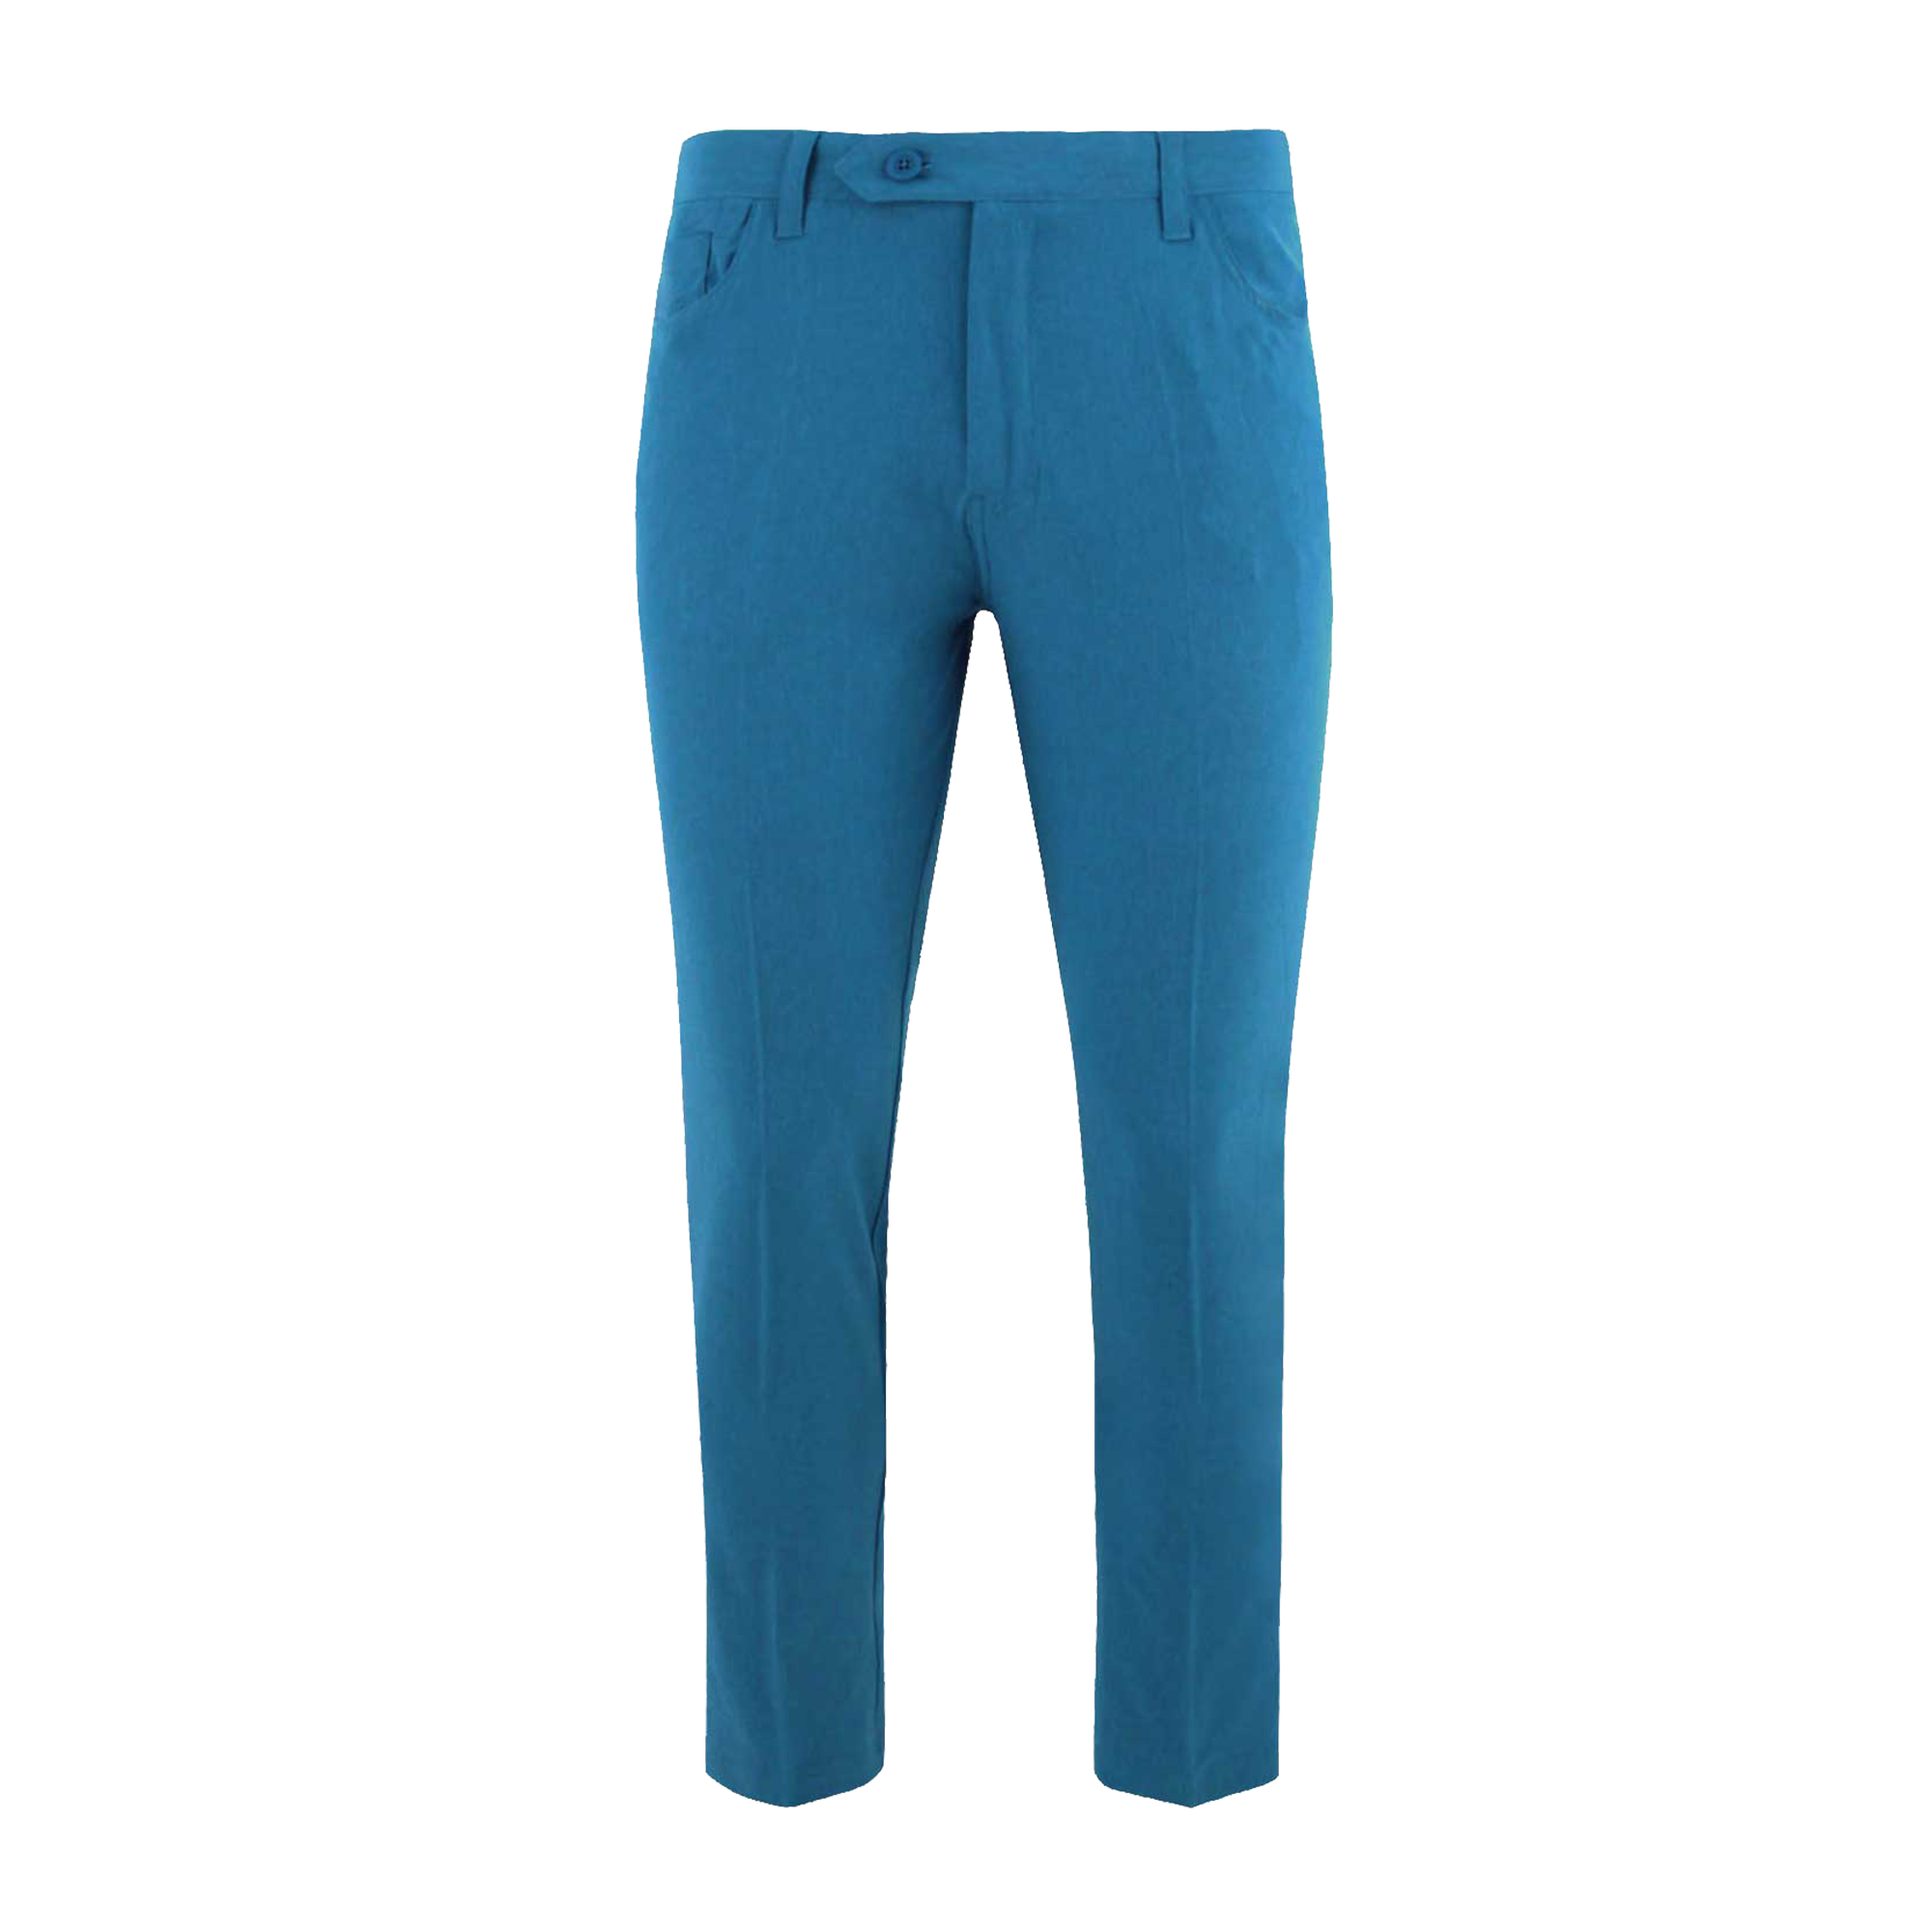 Bunker Mentaity Rox Blue Mens Golf Trousers | Golf Trousers & Pants ...